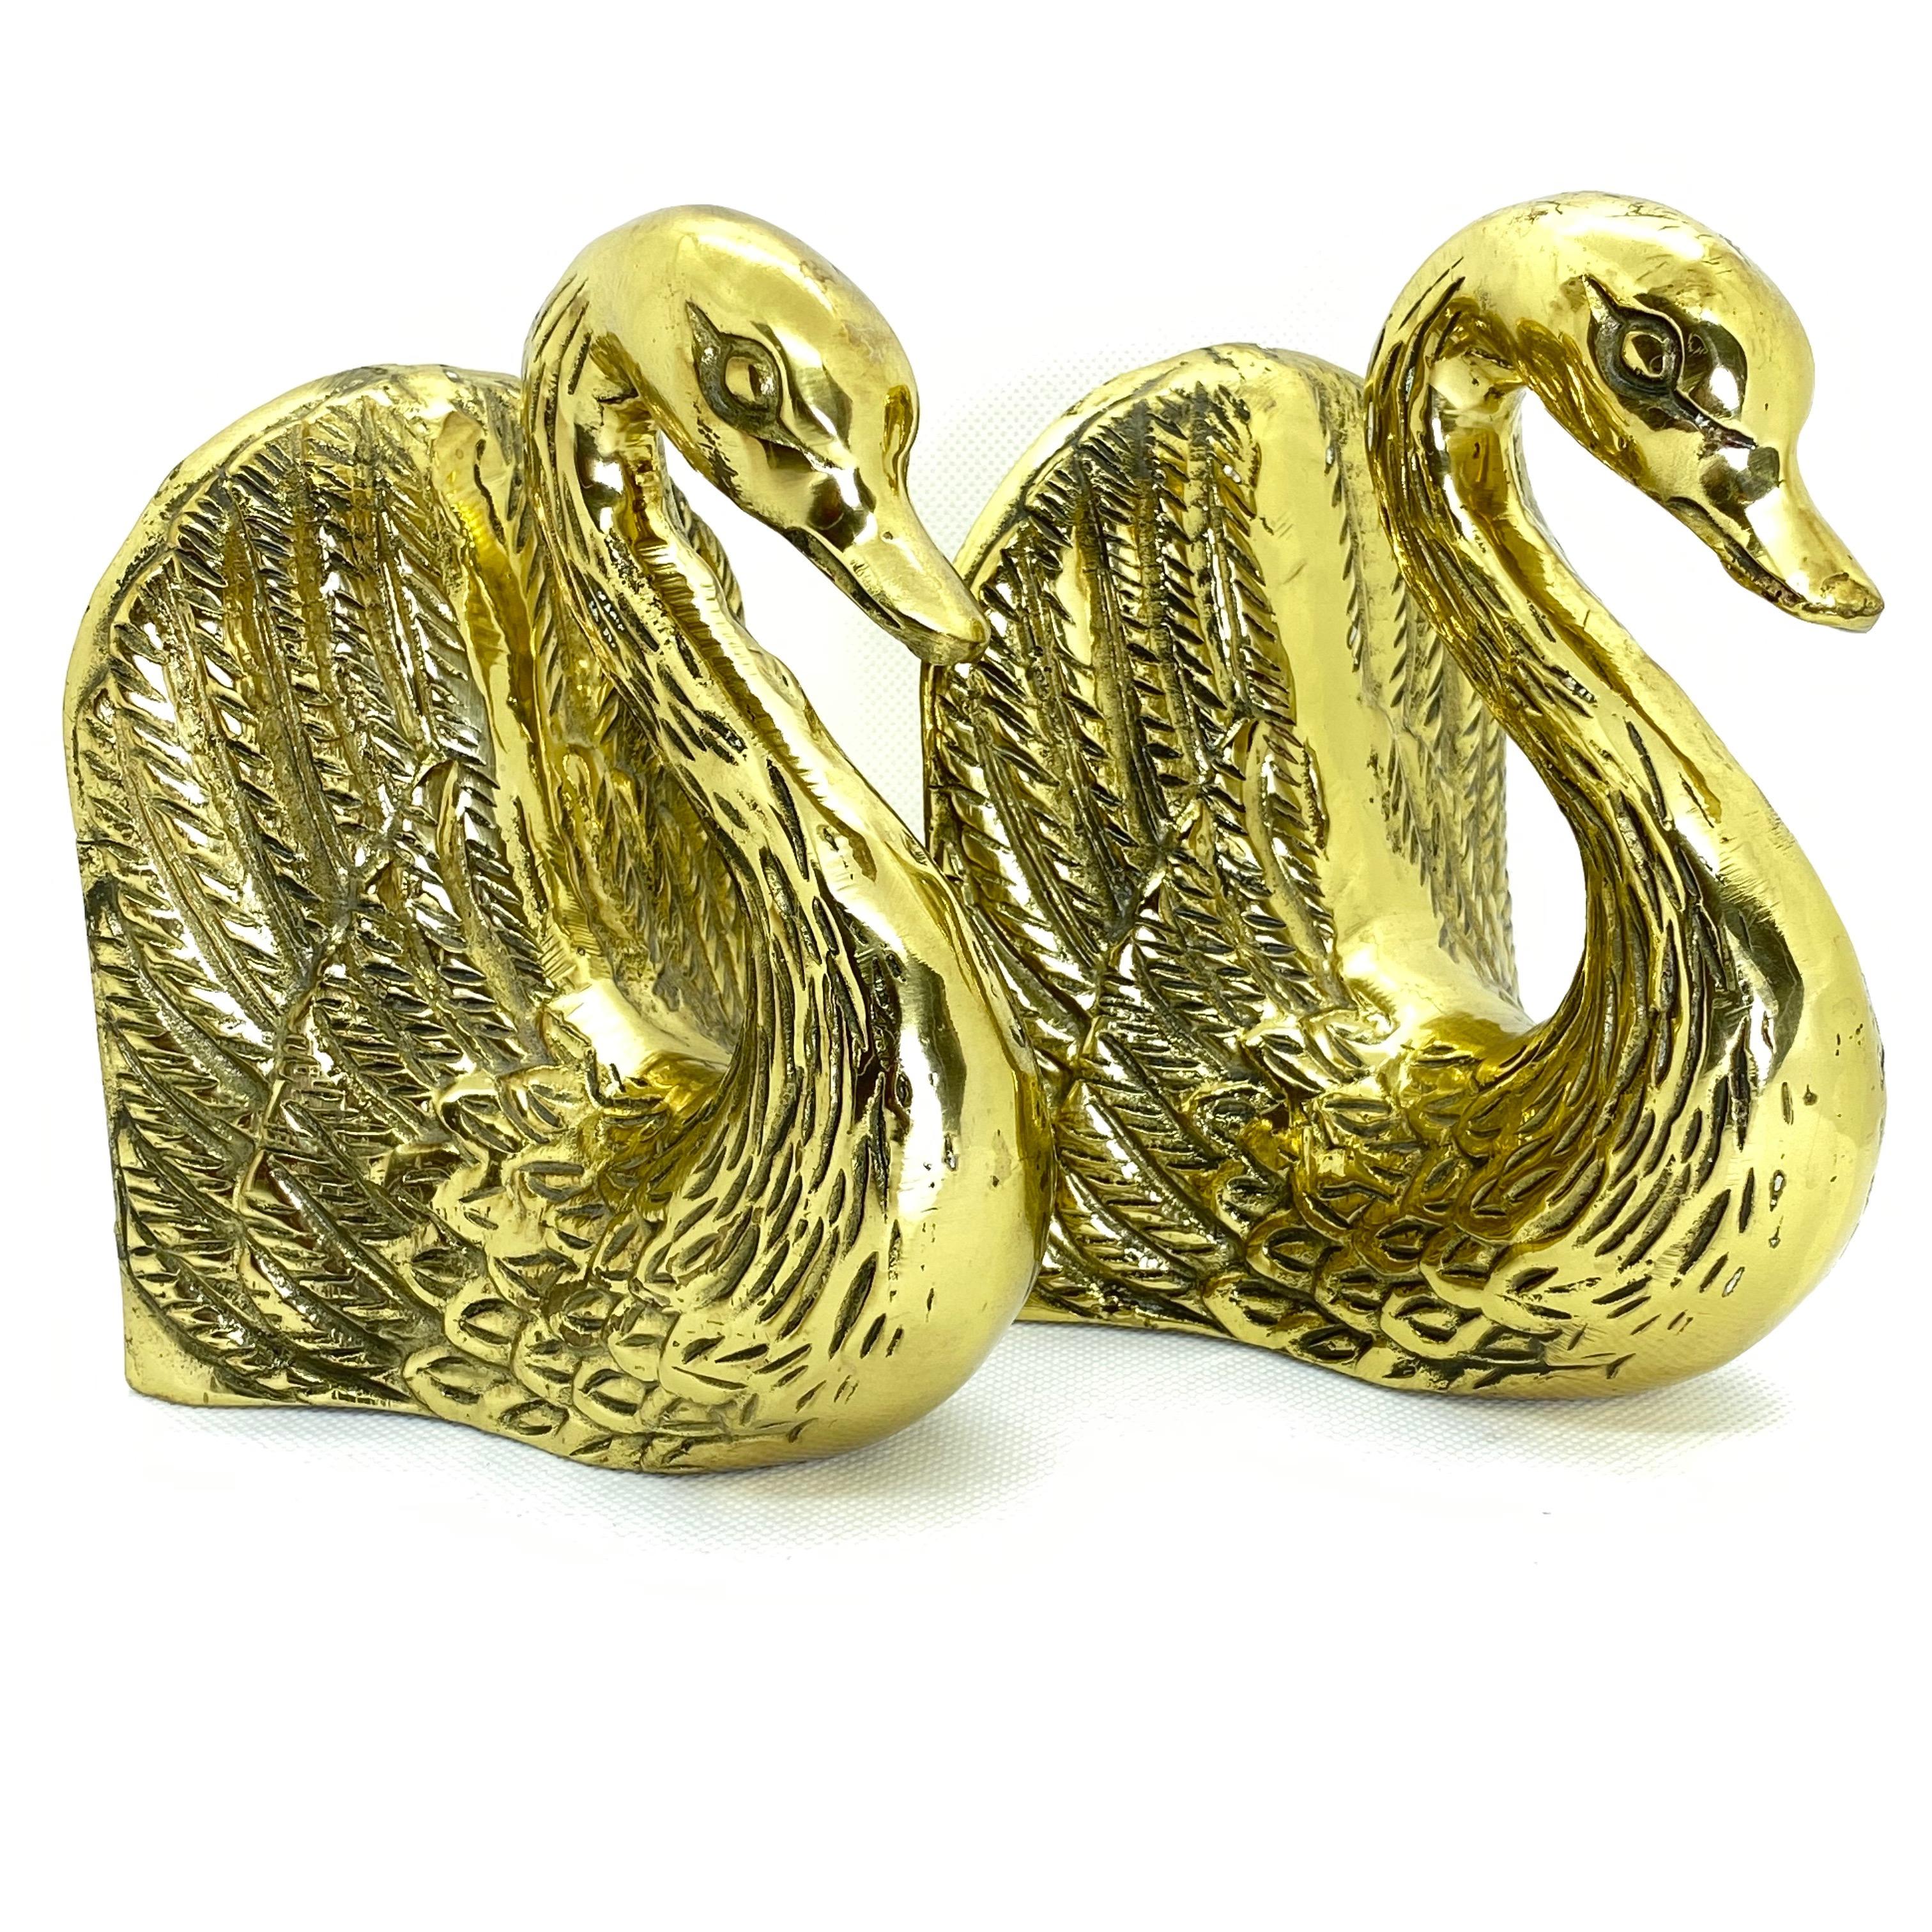 Hollywood Regency Pair of Vintage Polished Cast Brass Swan Bookends, circa 1950 For Sale